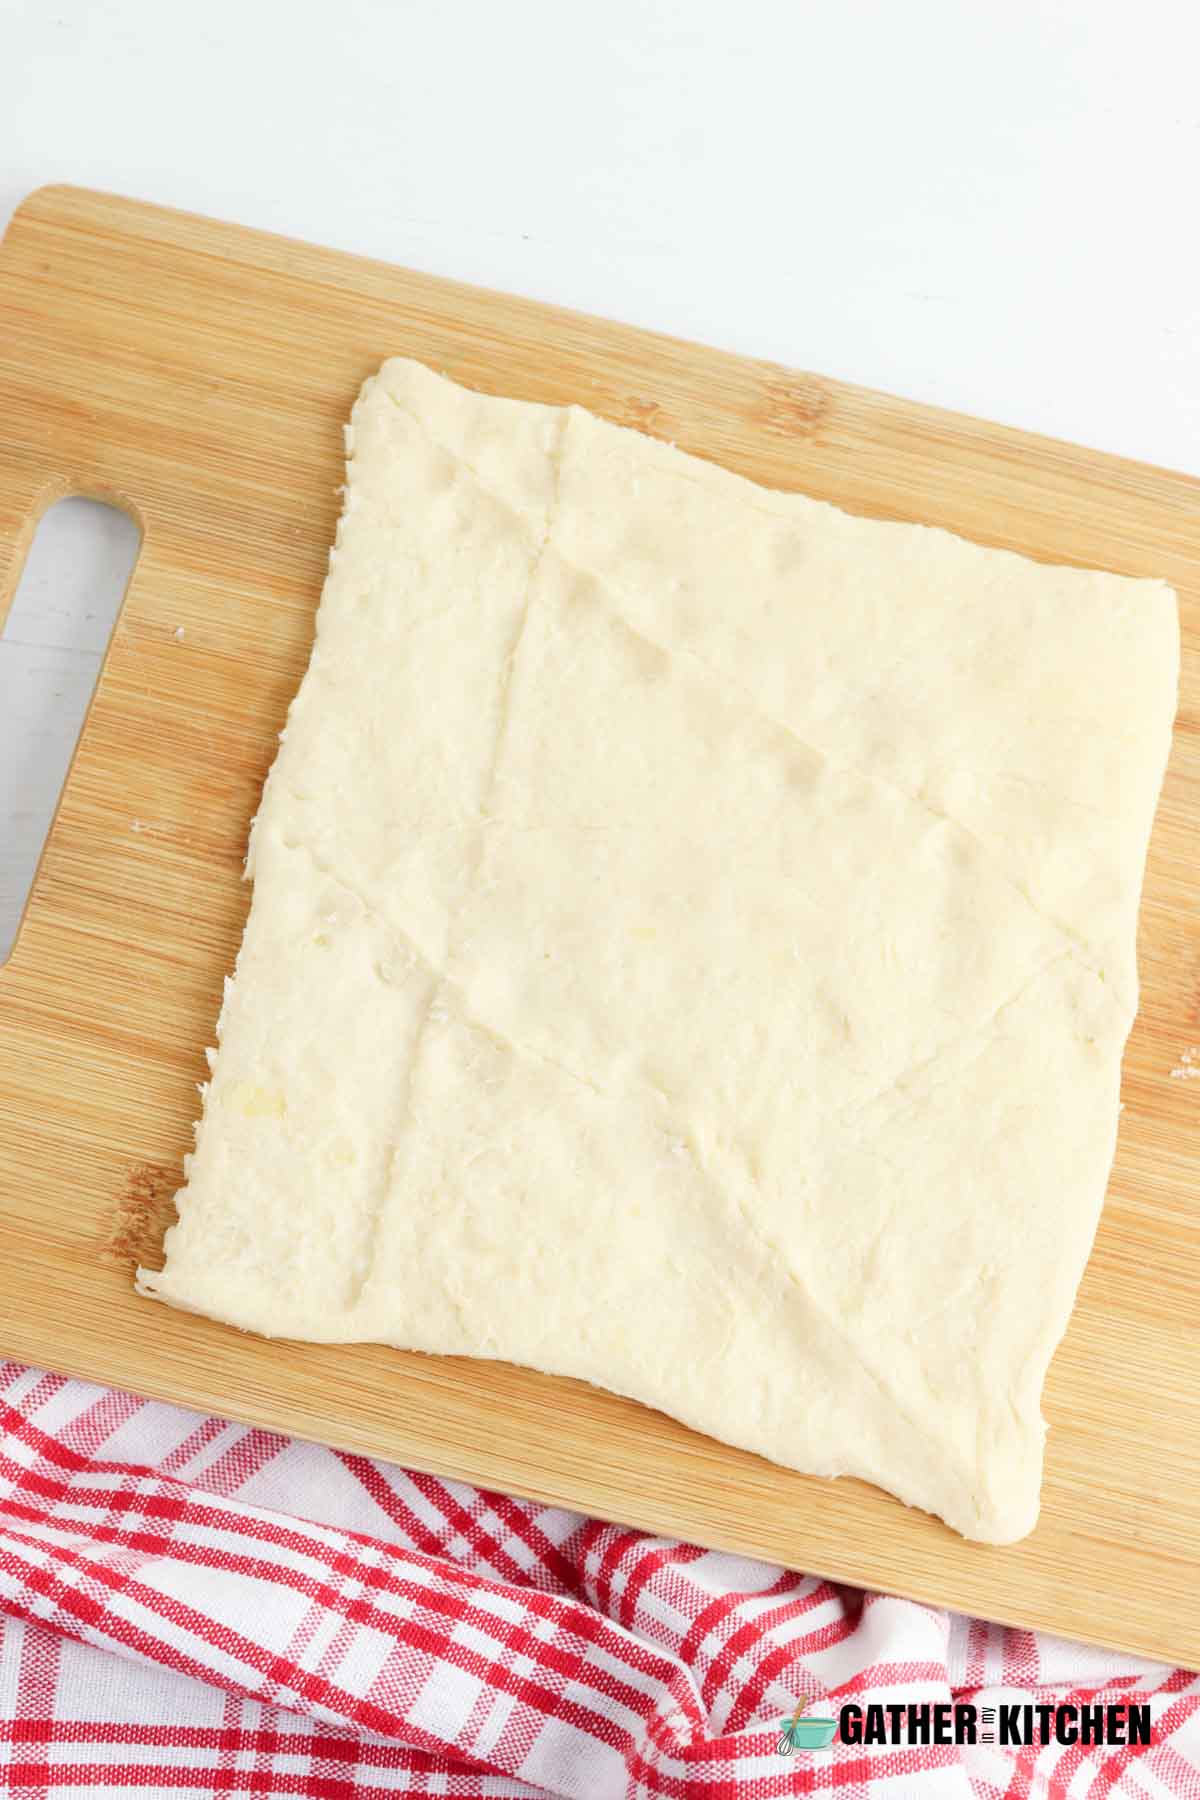 Crescent dough square with seams pinched together.